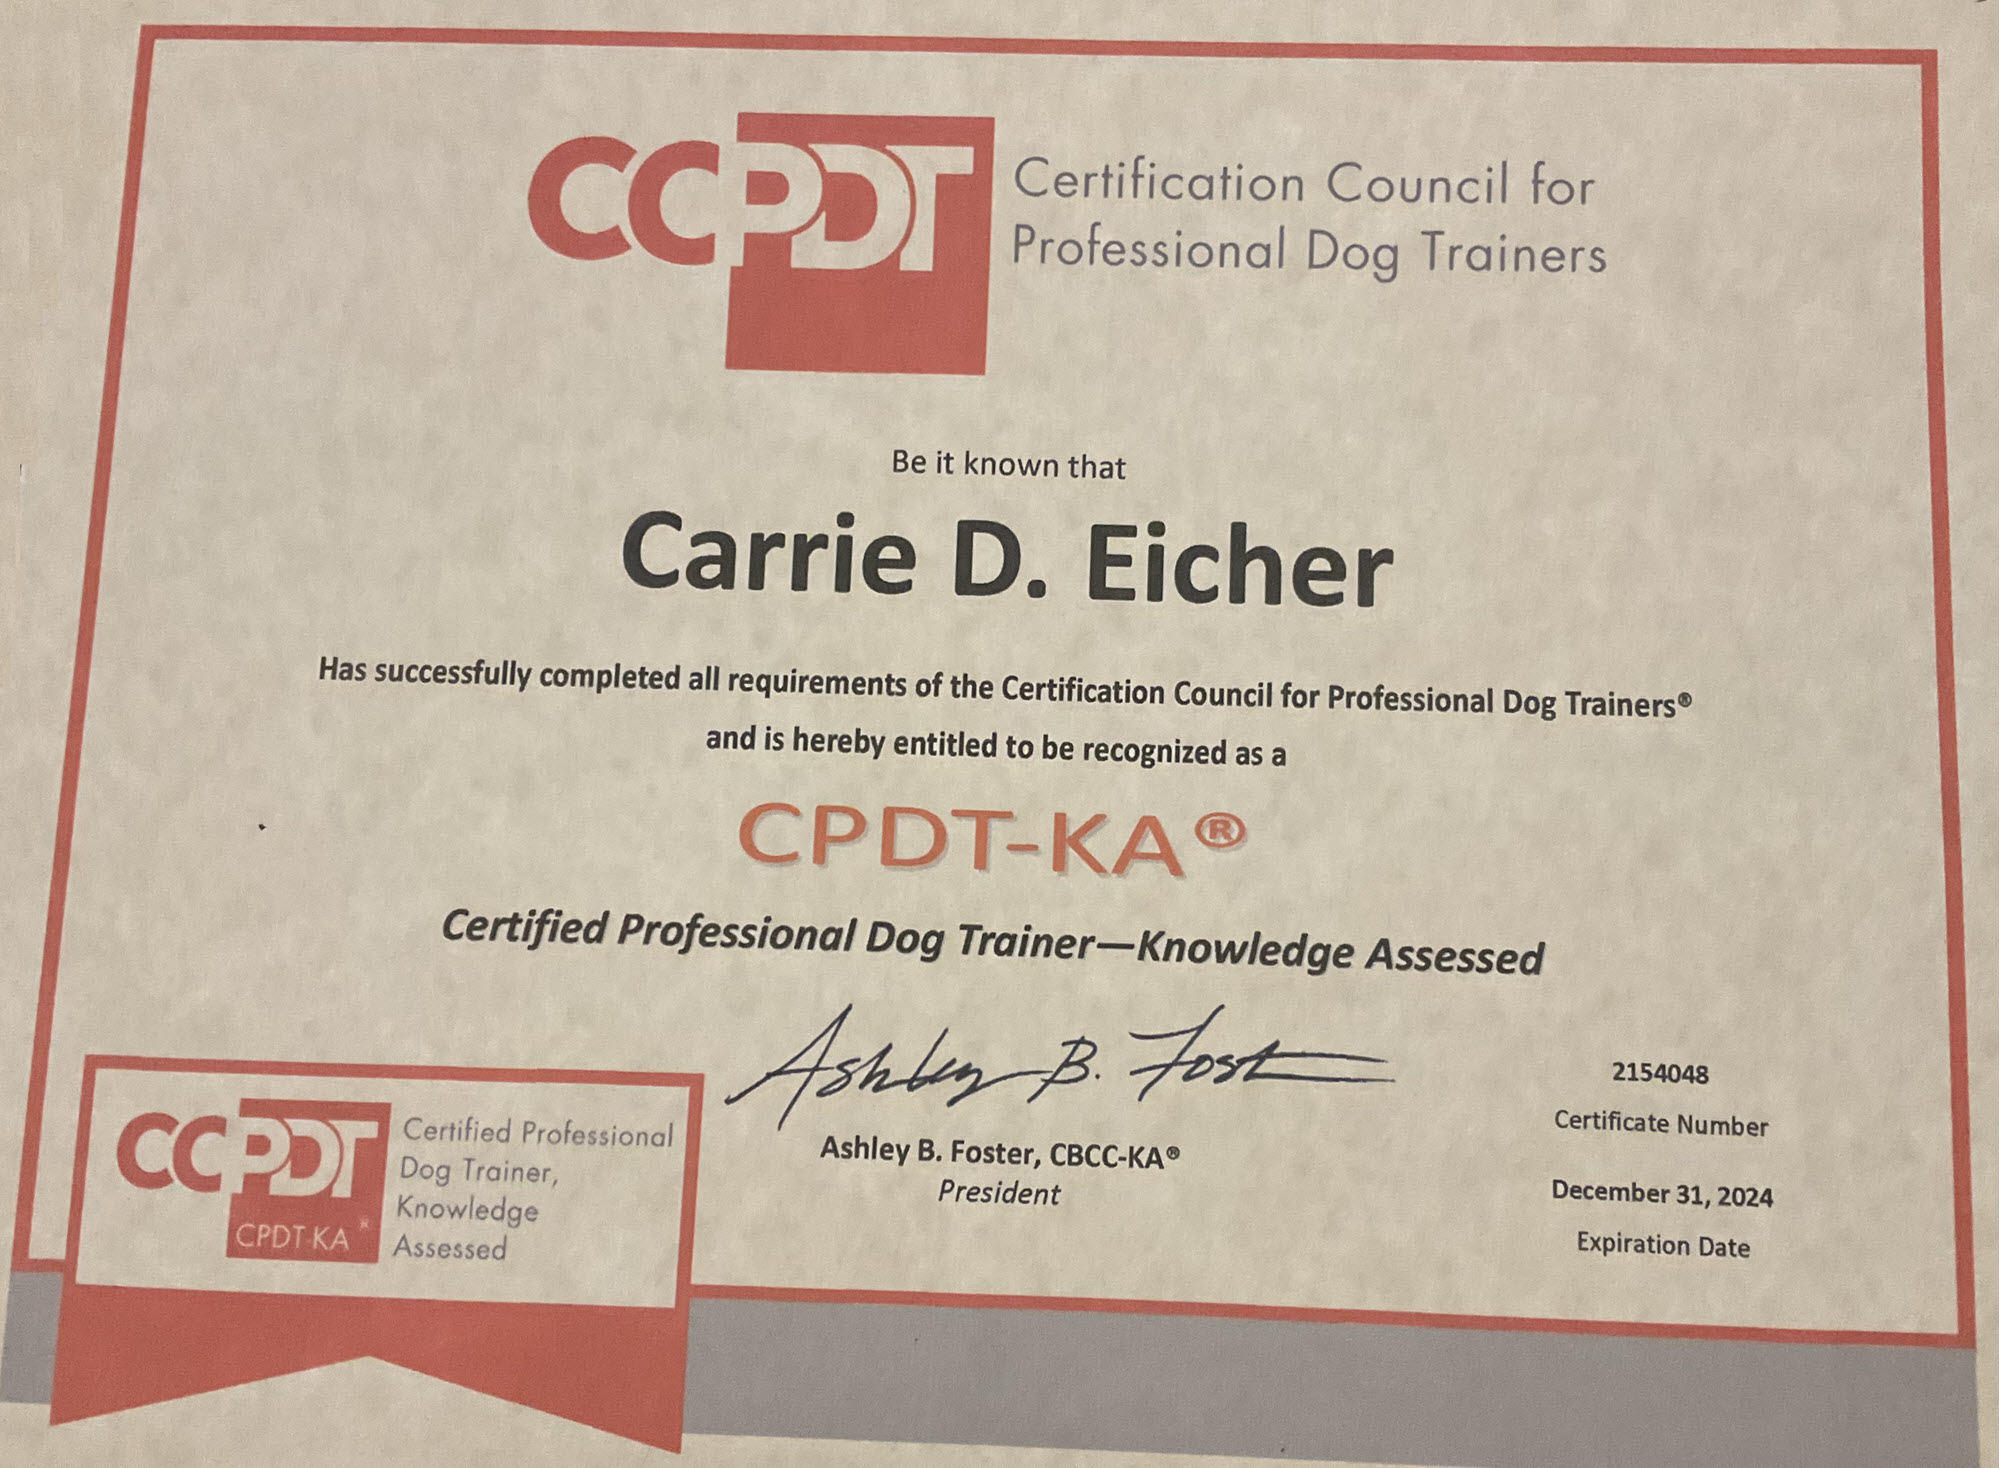 Carrie is awarded with Certified Professional Dog Trainer - Knowledge Assessed